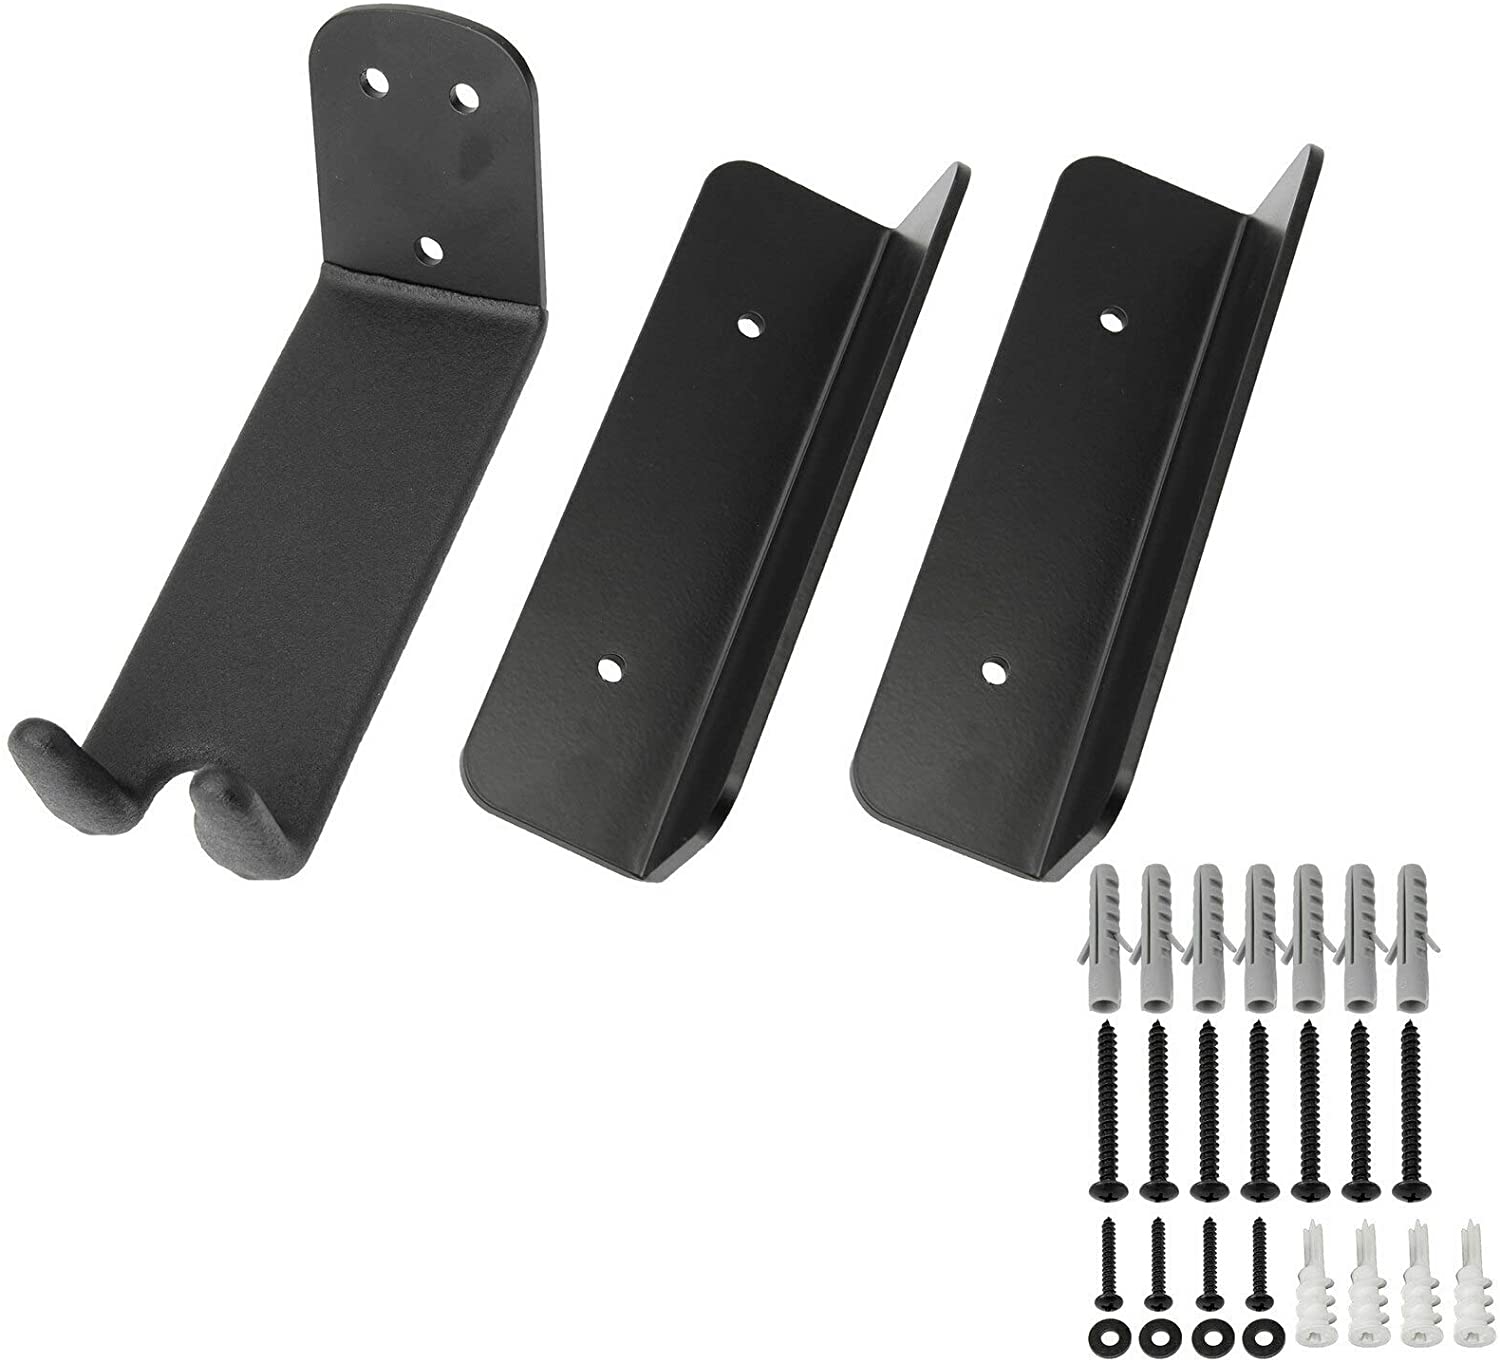 JH-Mech Wall Mount Support Bracket Supplier- And Wall Protection Pads Included Bicycle Pedal Hook